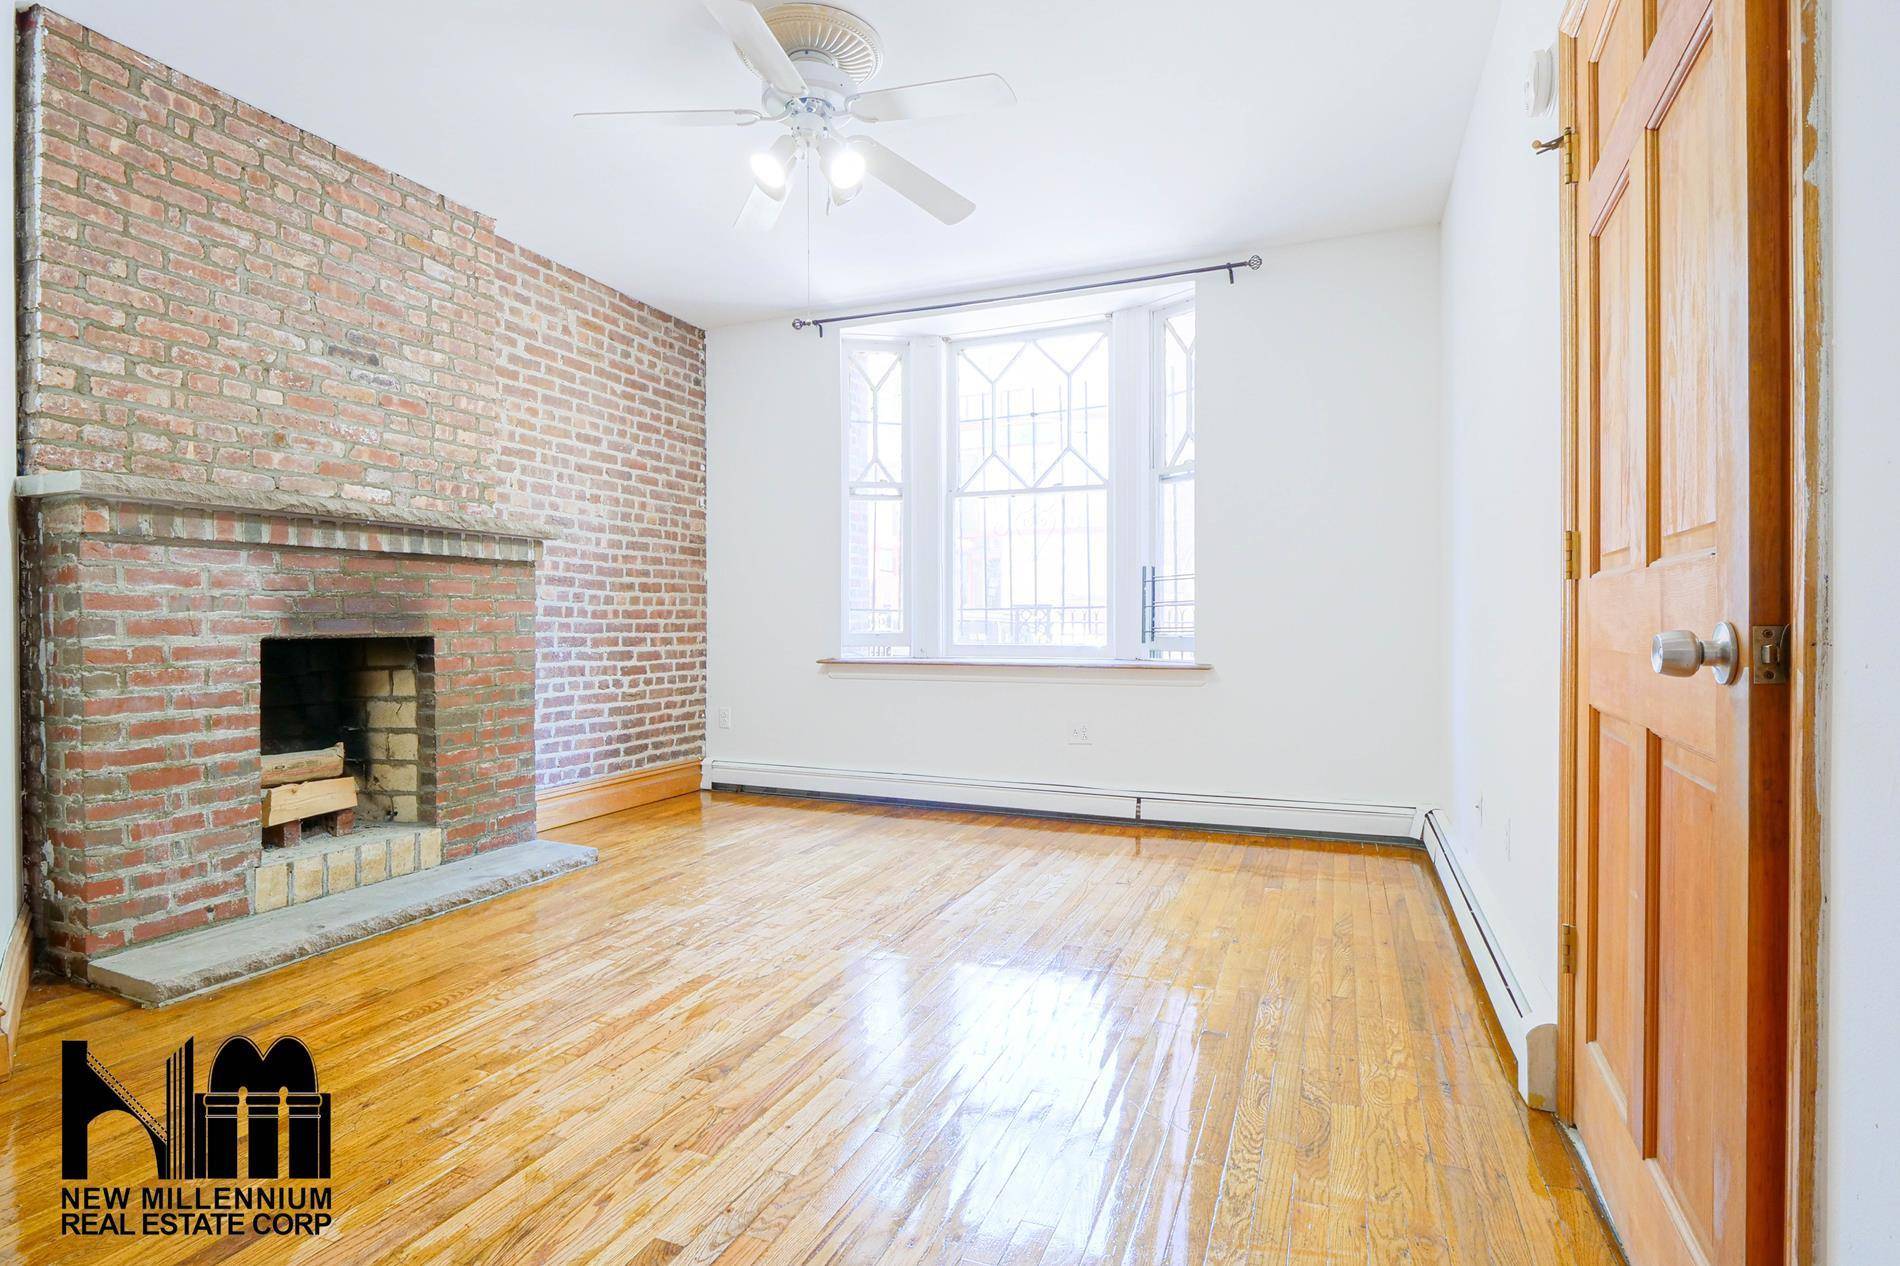 Located on the first floor of a professionally managed and maintained building in prime Clinton Hill, this spacious, recently renovated duplex home offers two bedrooms, two full baths and a ...